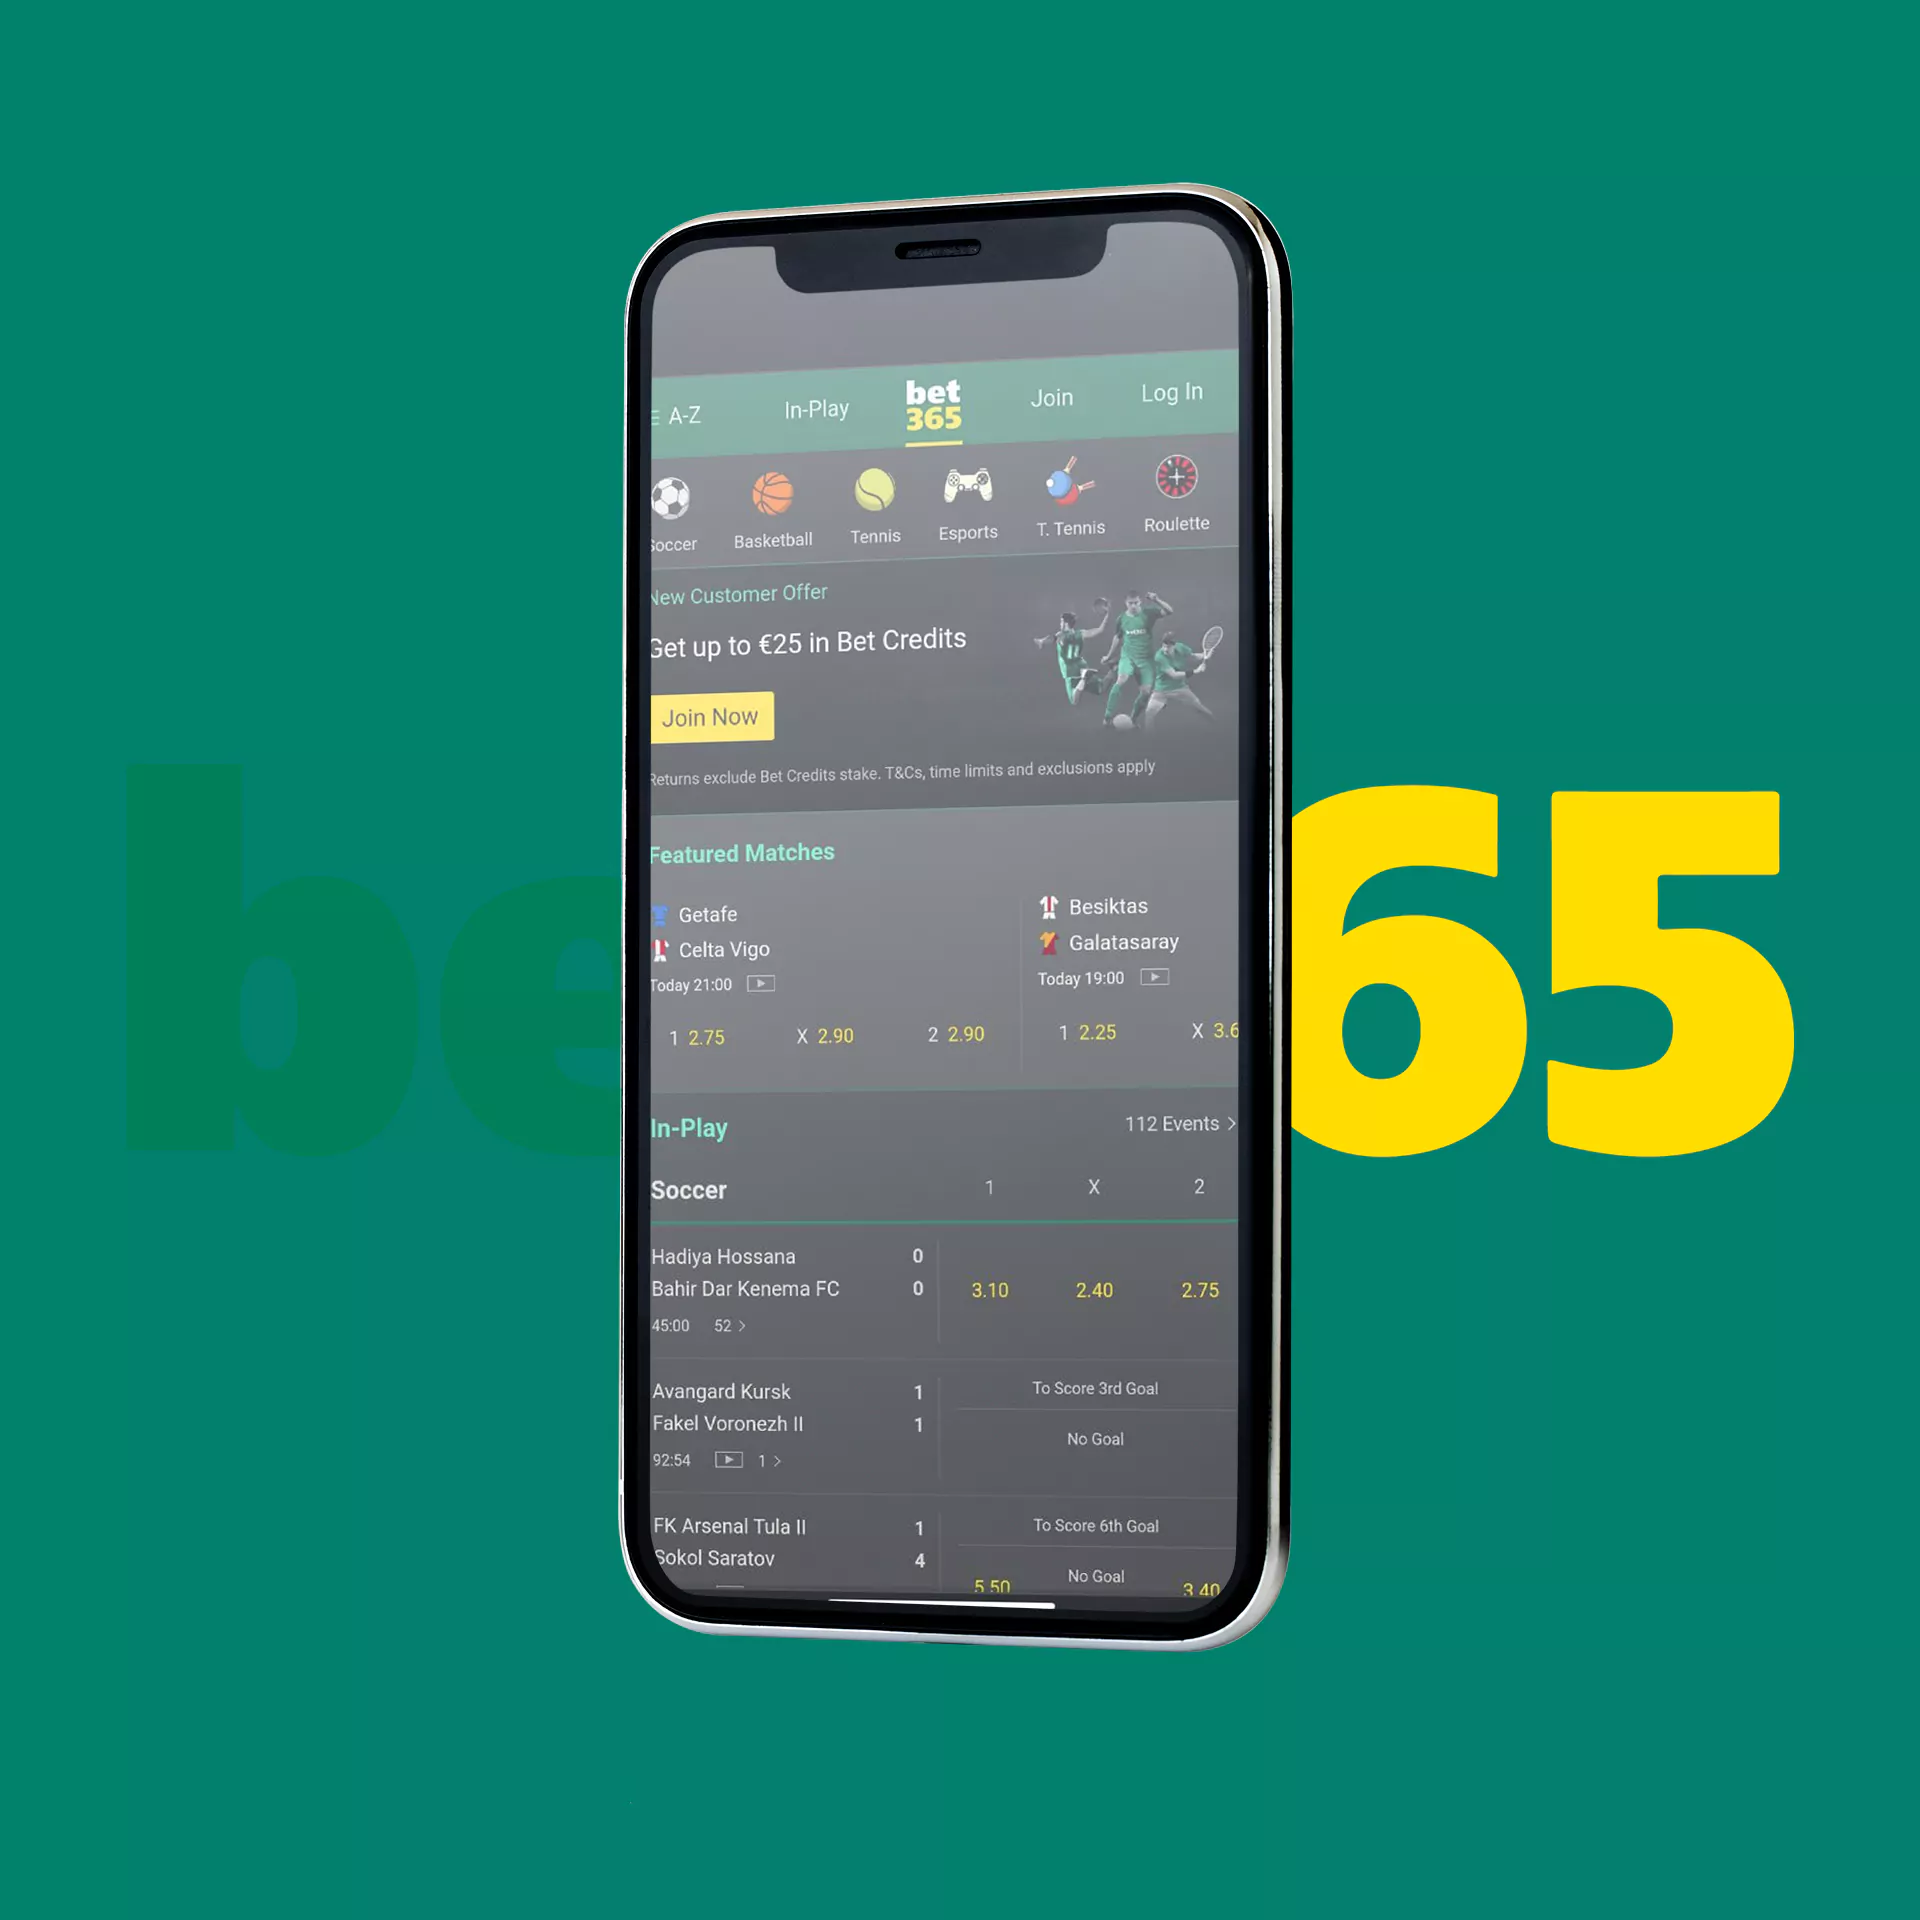 Go to the official website Bet365. Use VPN, if you can`t open it.